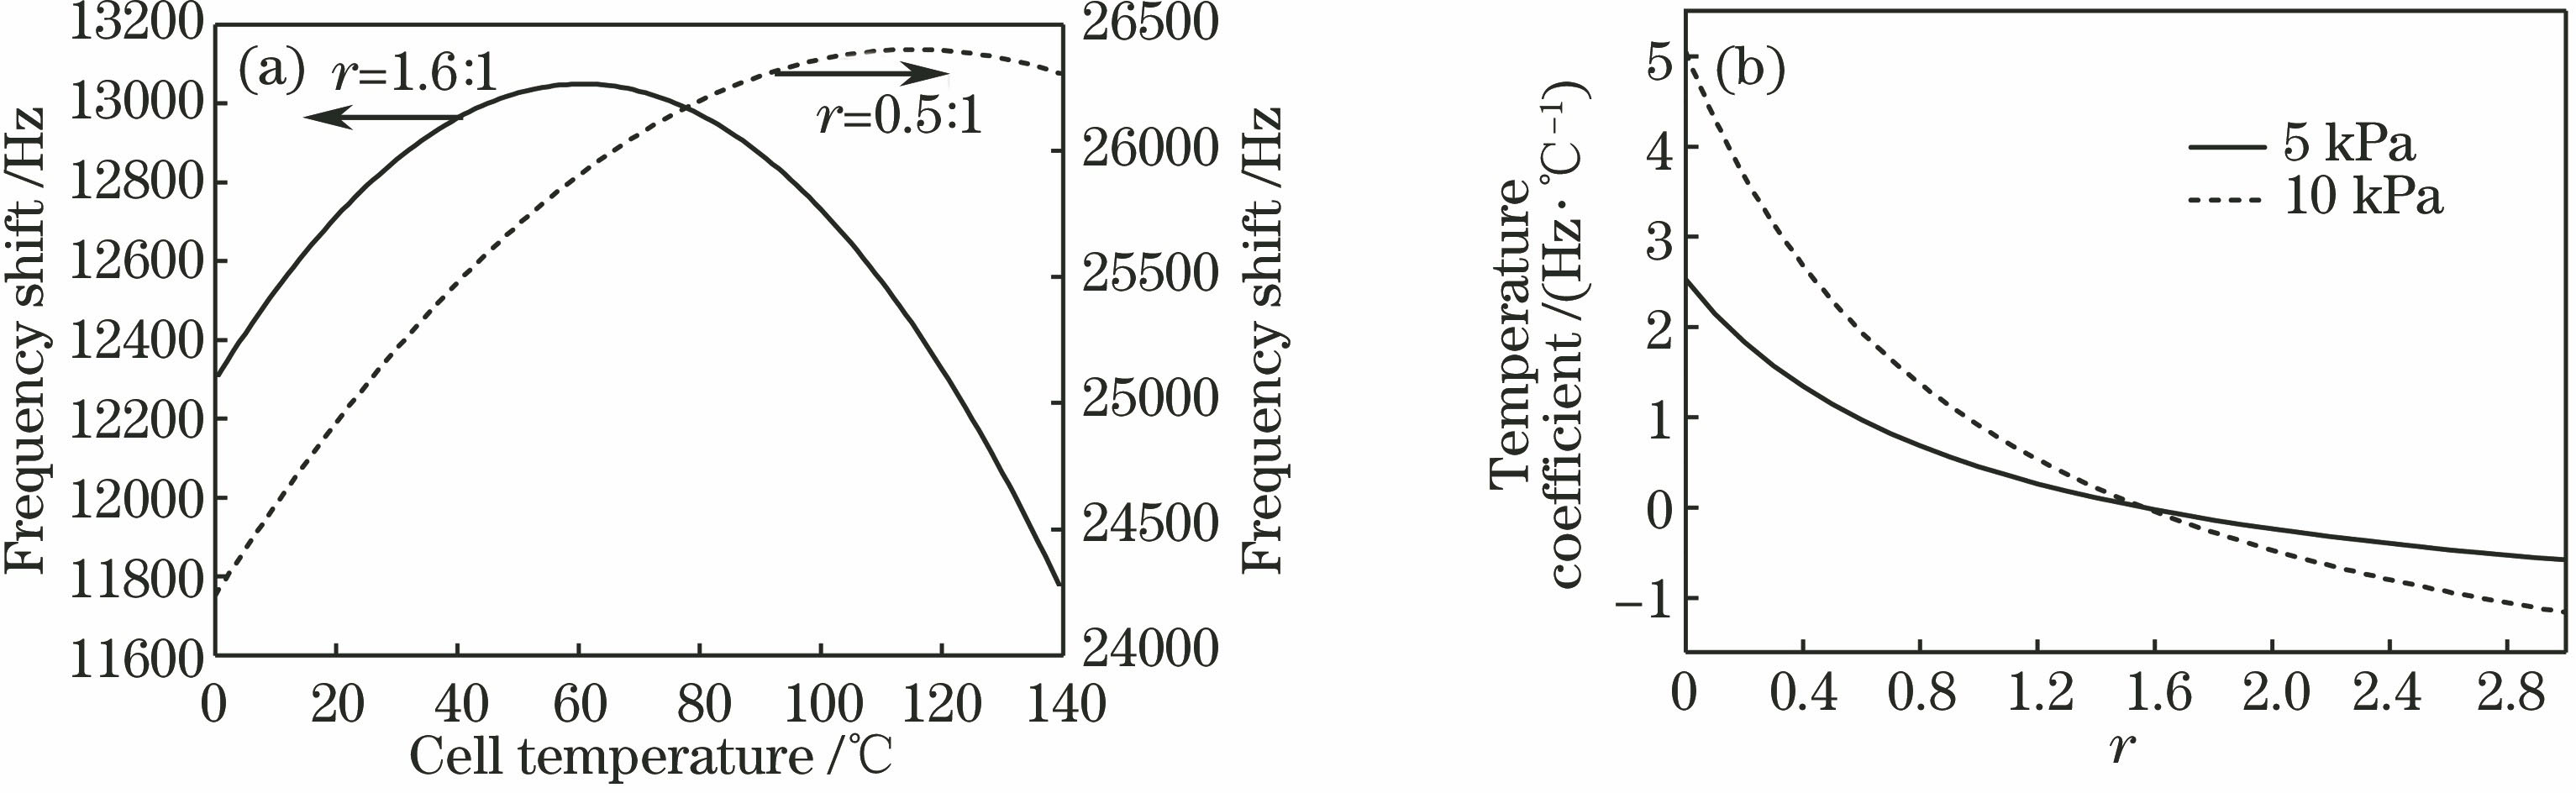 Simulation results of temperature frequency shift for buffer gas. (a) Frequency shift of buffer gas mixture versus cell temperature; (b) temperature coefficient versus pressure ratio r of Ar-N2